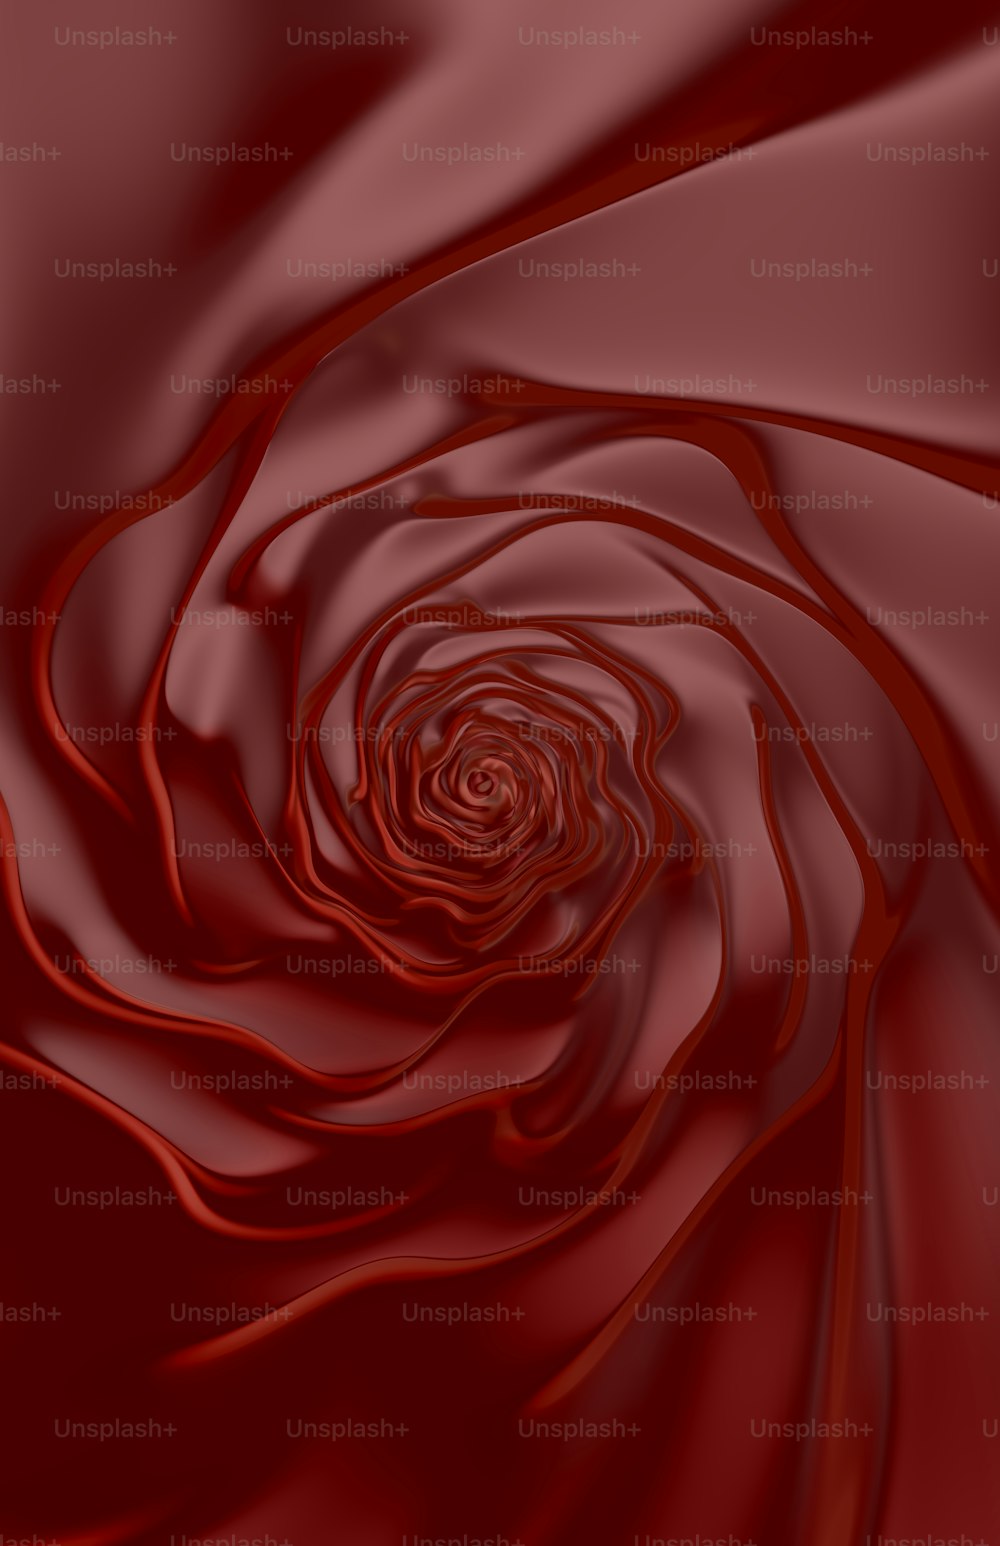 a red rose that is in the middle of a picture